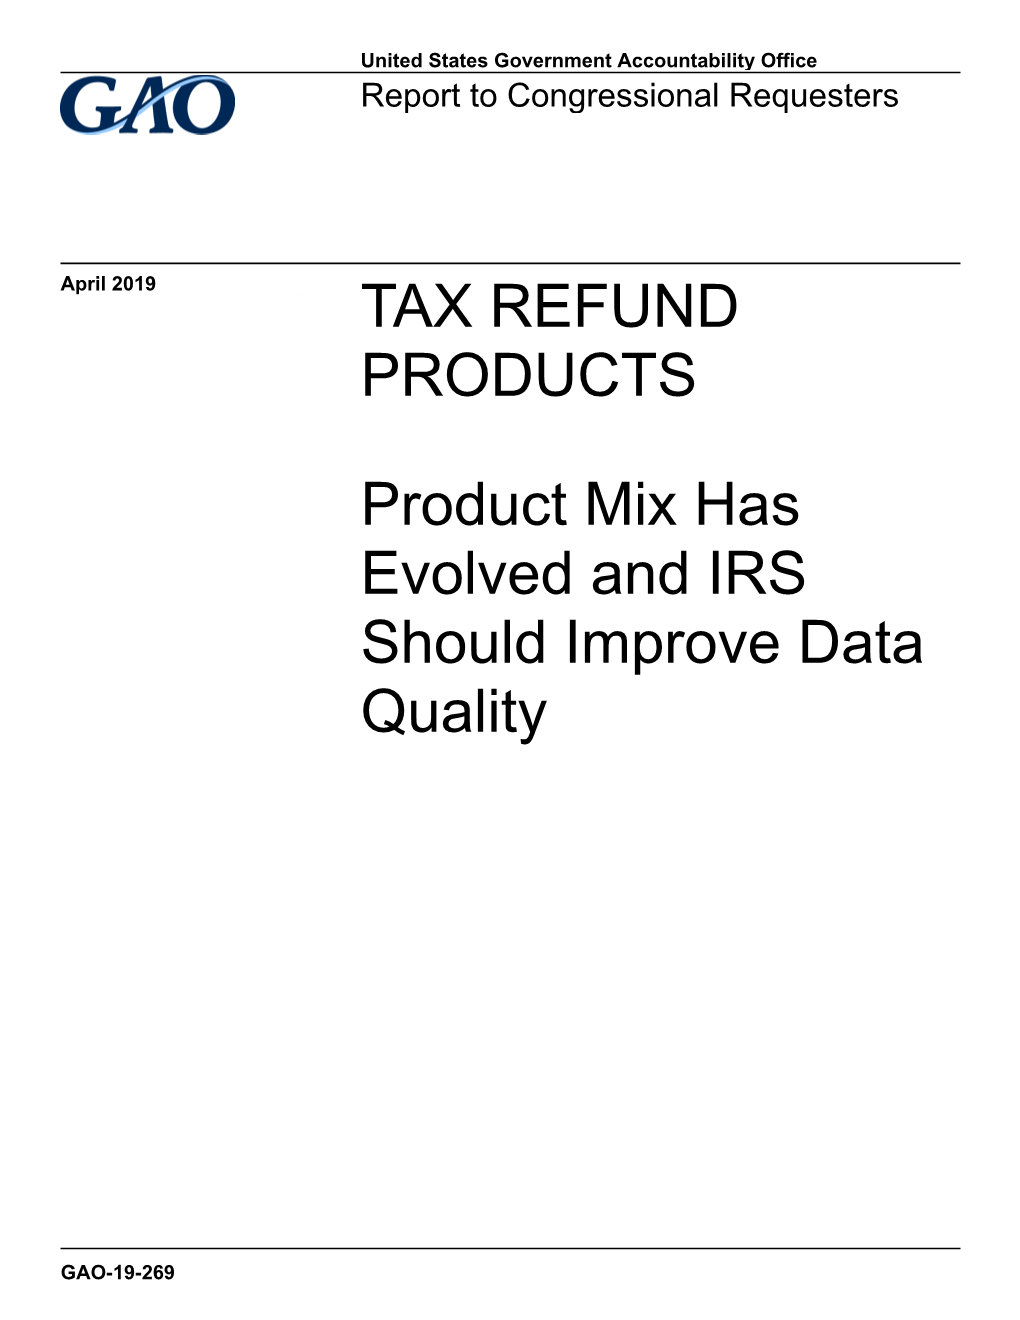 Gao-19-269, Tax Refund Products